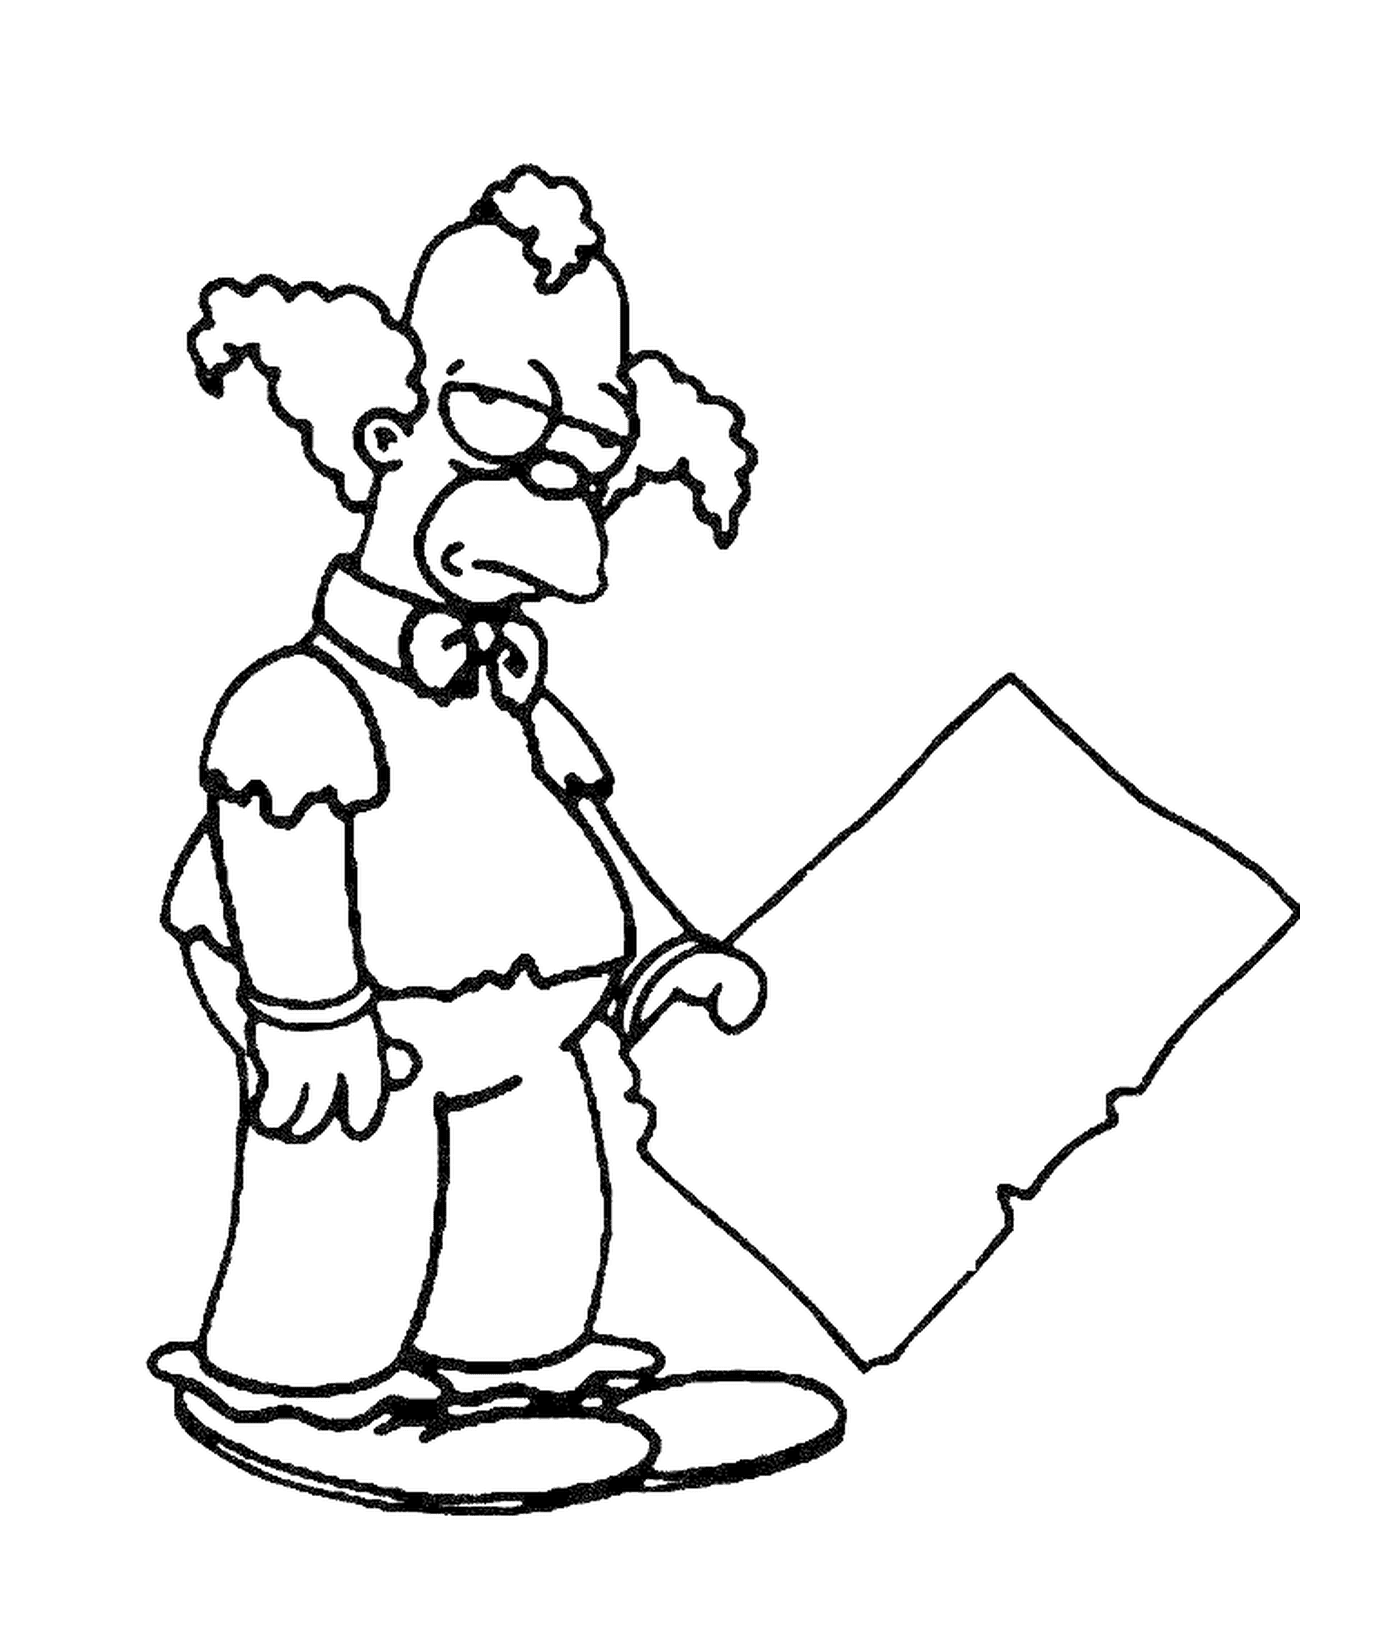  Krusty the disappointed clown, no one holding a sign 